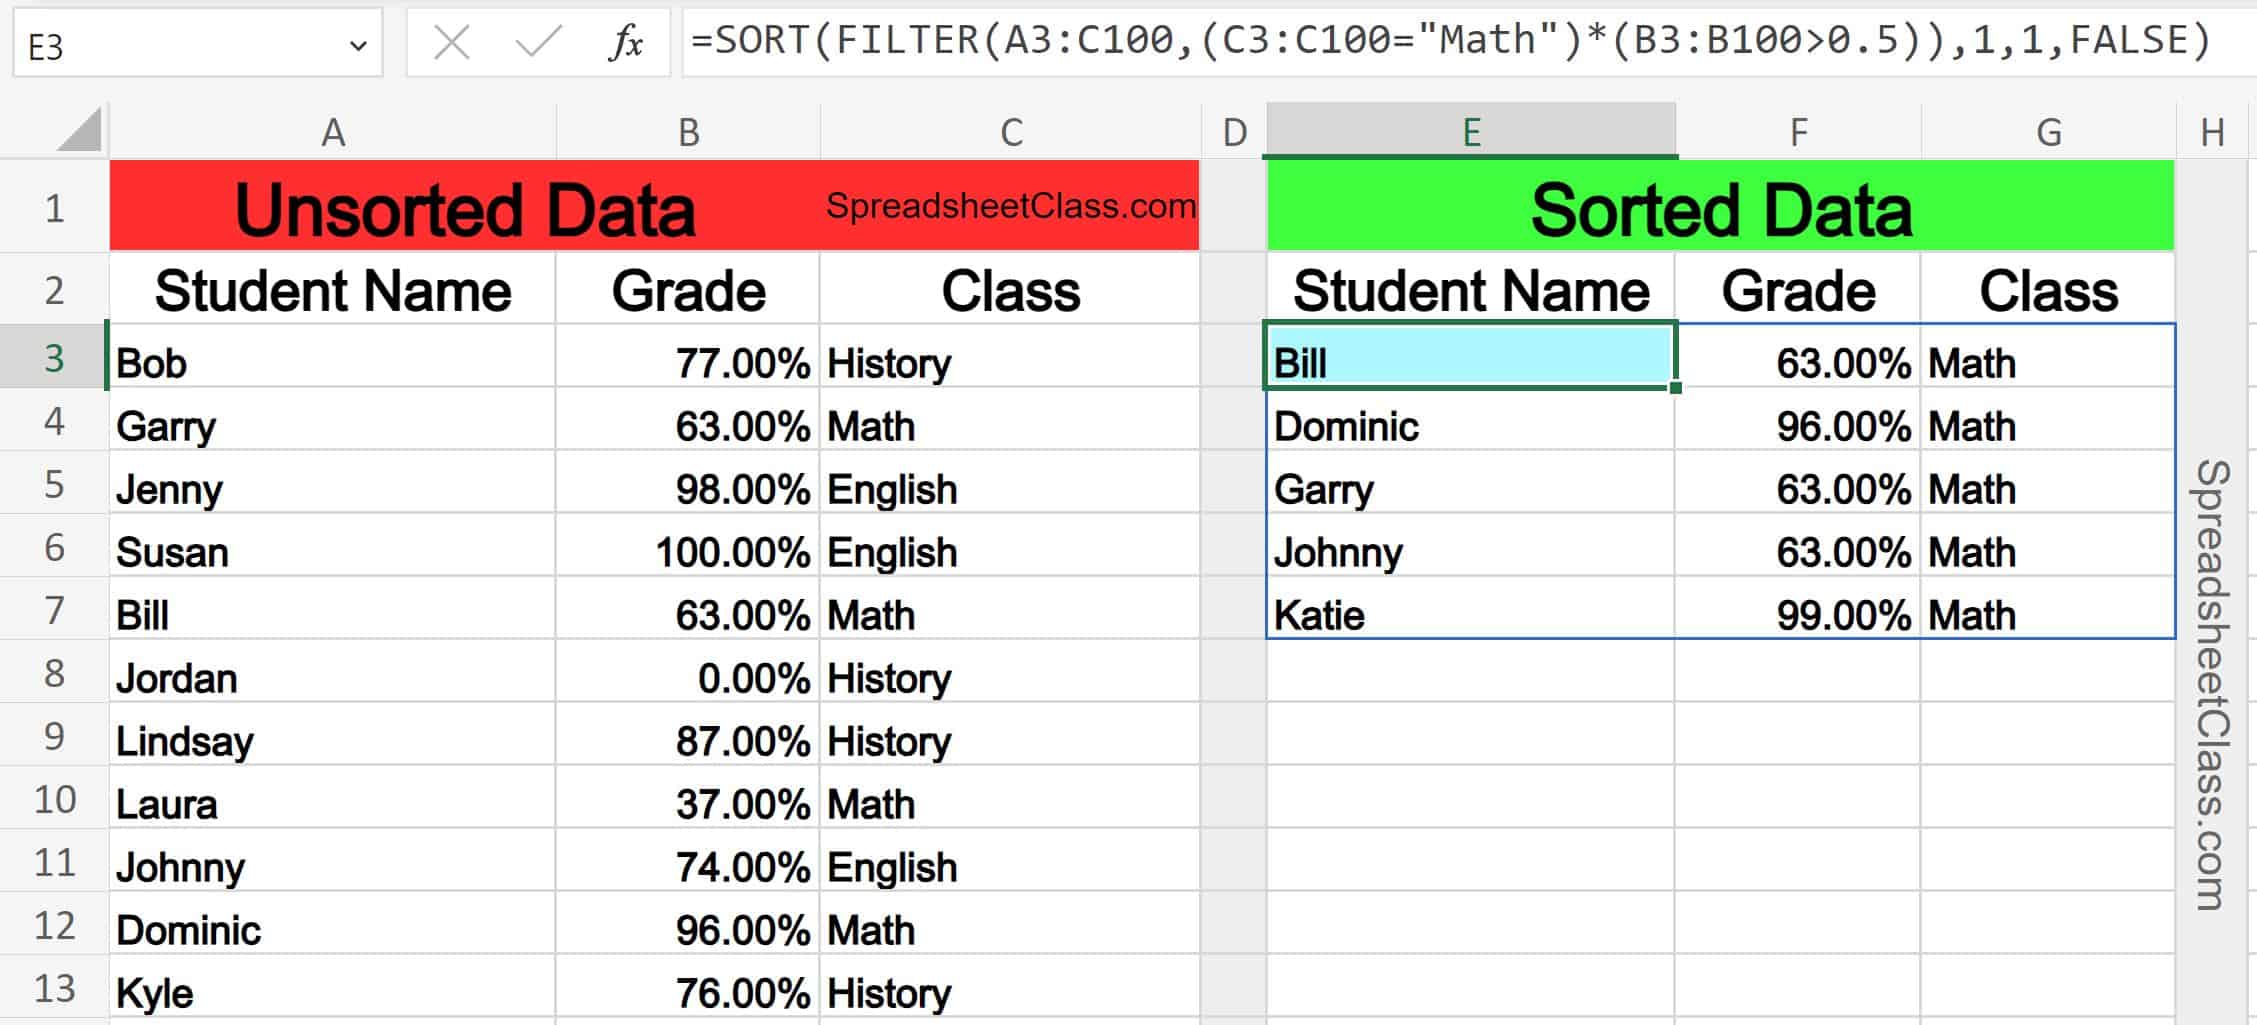 Example of the Excel SORT FILTER nested formula, sorting and filtering by multiple conditions (AND logic)